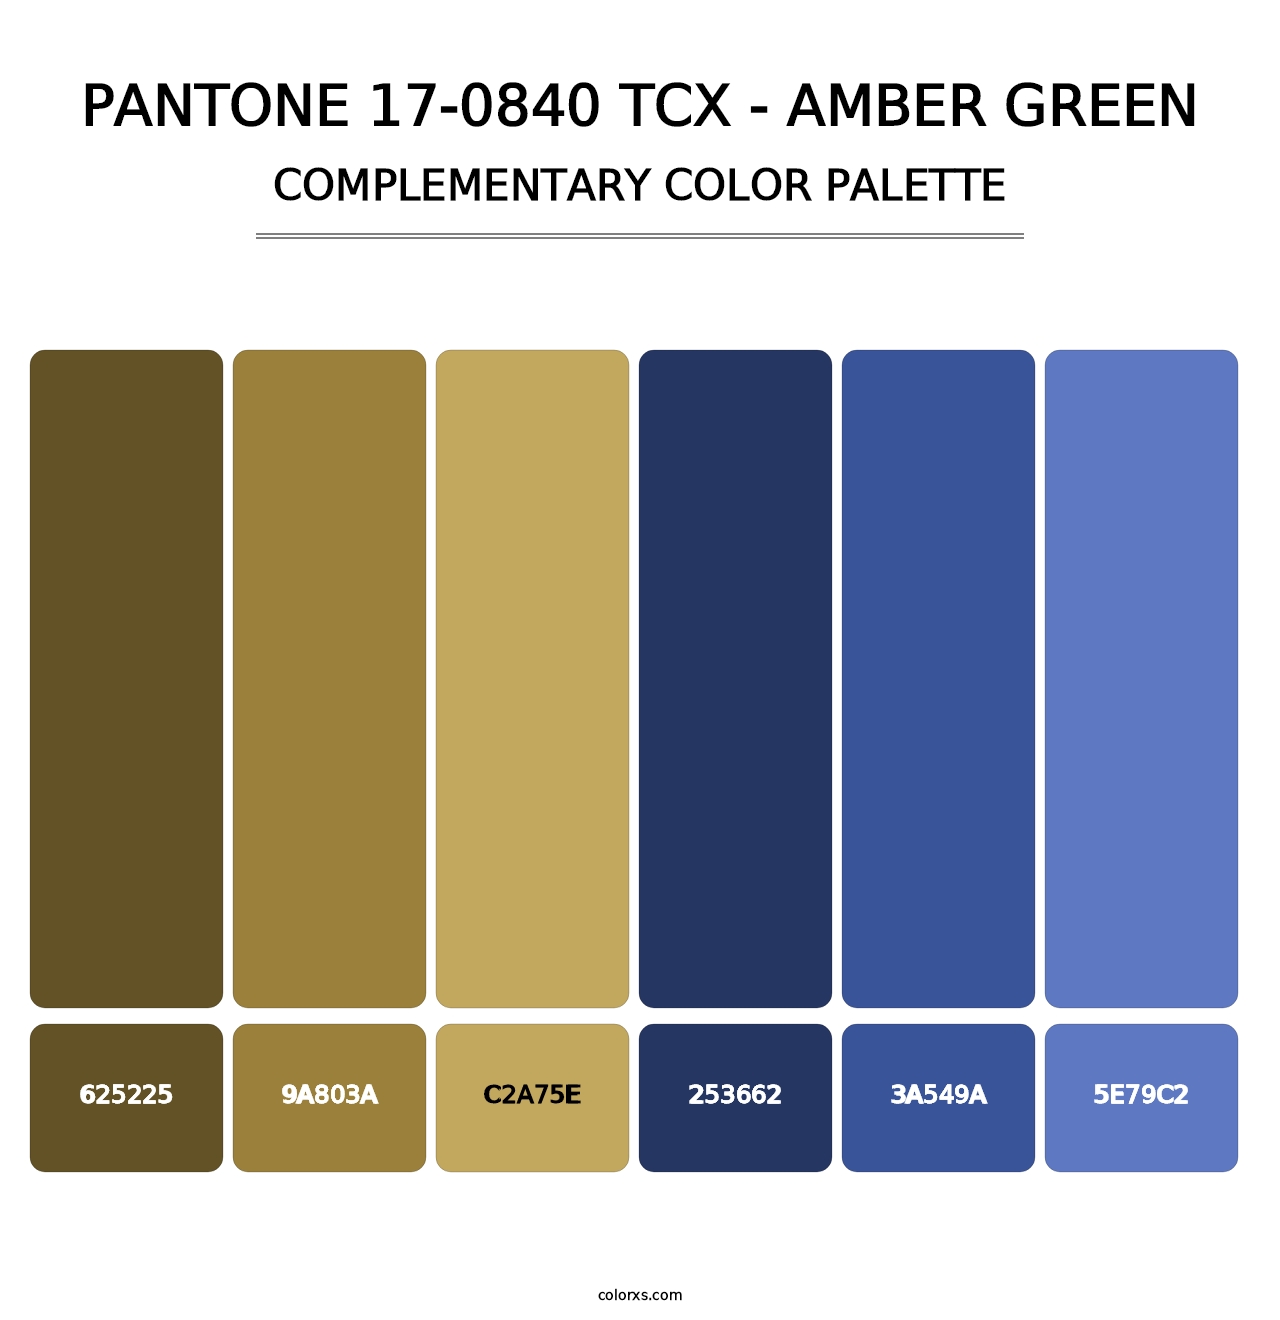 PANTONE 17-0840 TCX - Amber Green - Complementary Color Palette